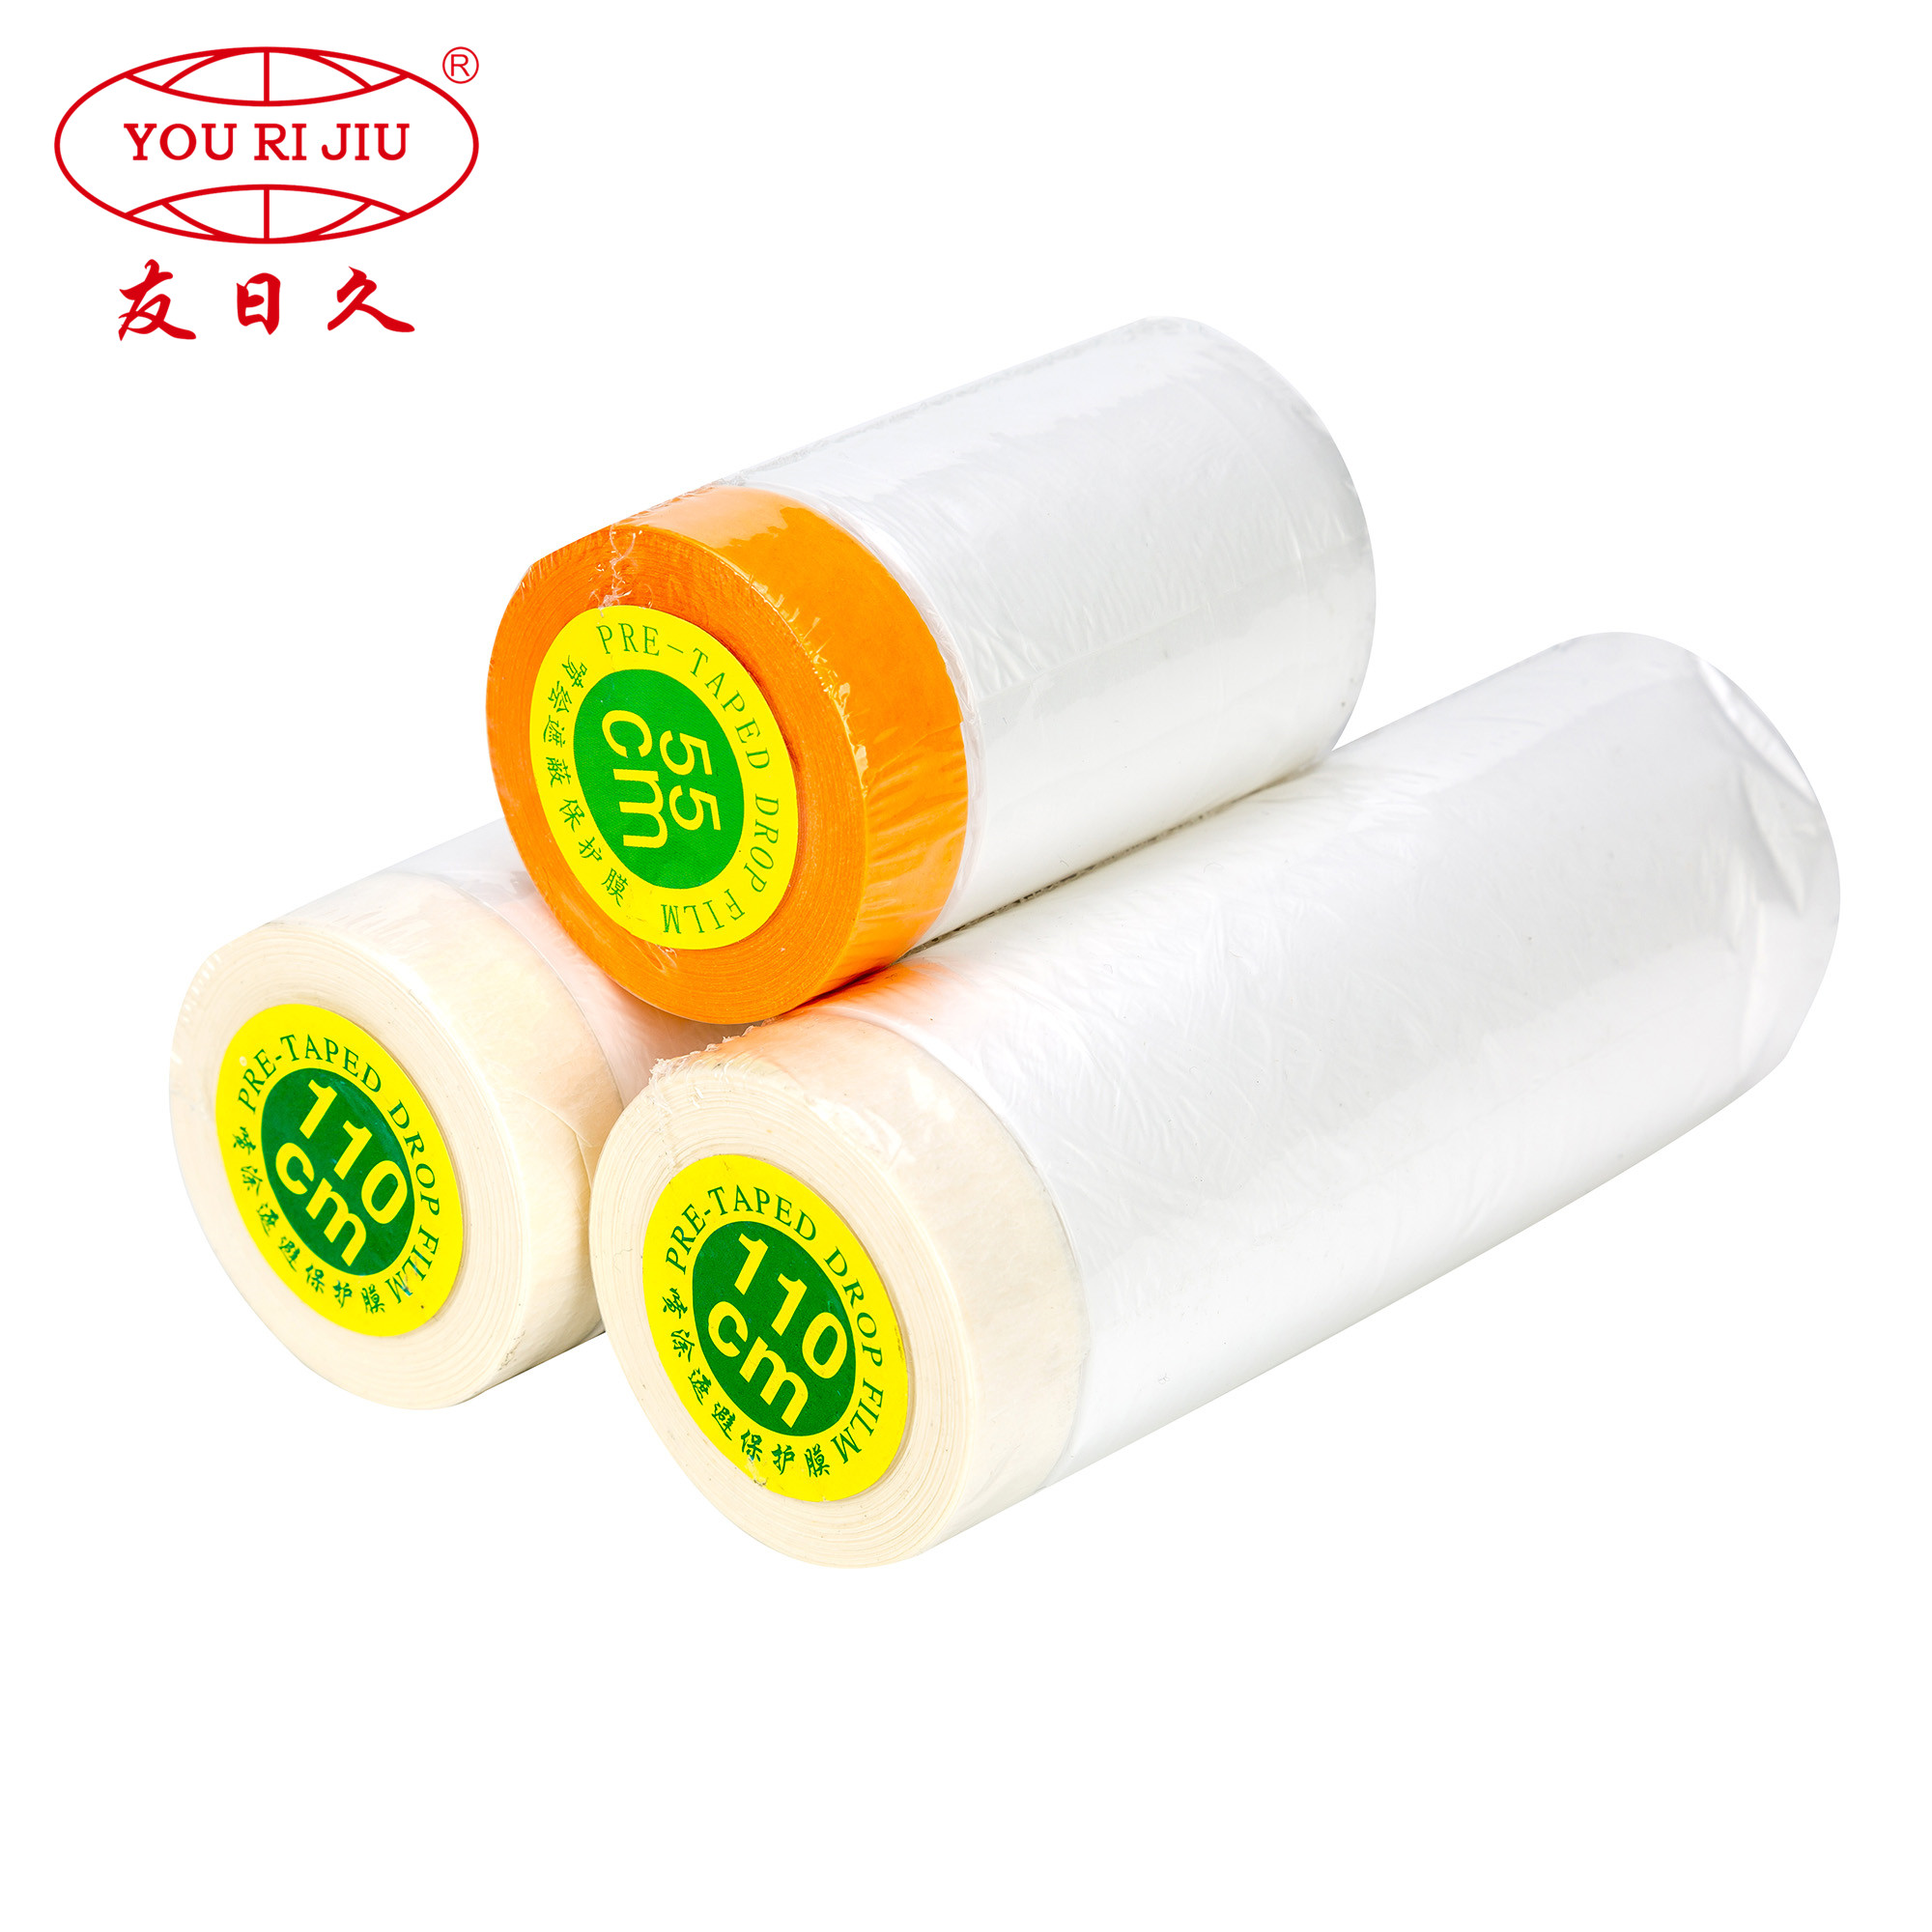 Yourijiu Masking Film Tape inquire now for office-2